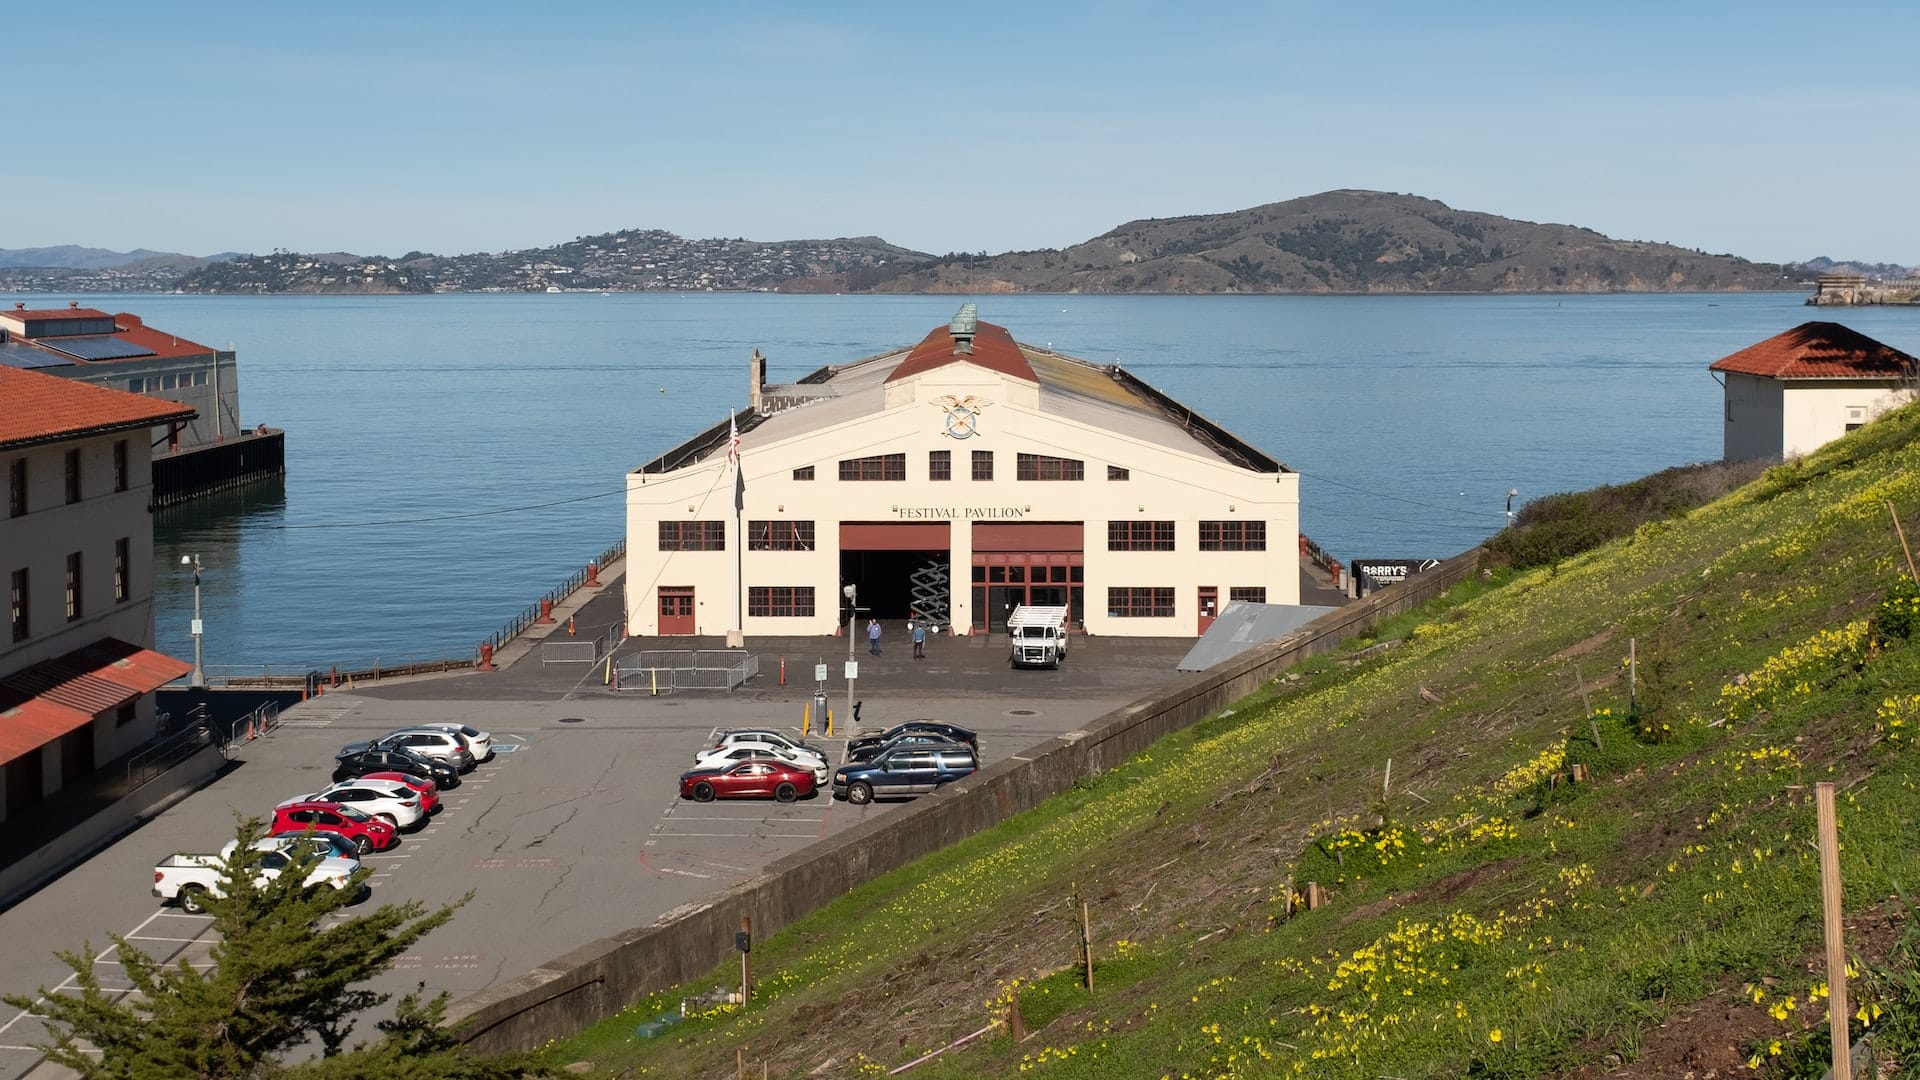 Fort Mason Center pavilion from above, with the Bay in the background and a grassy hill in the foreground.